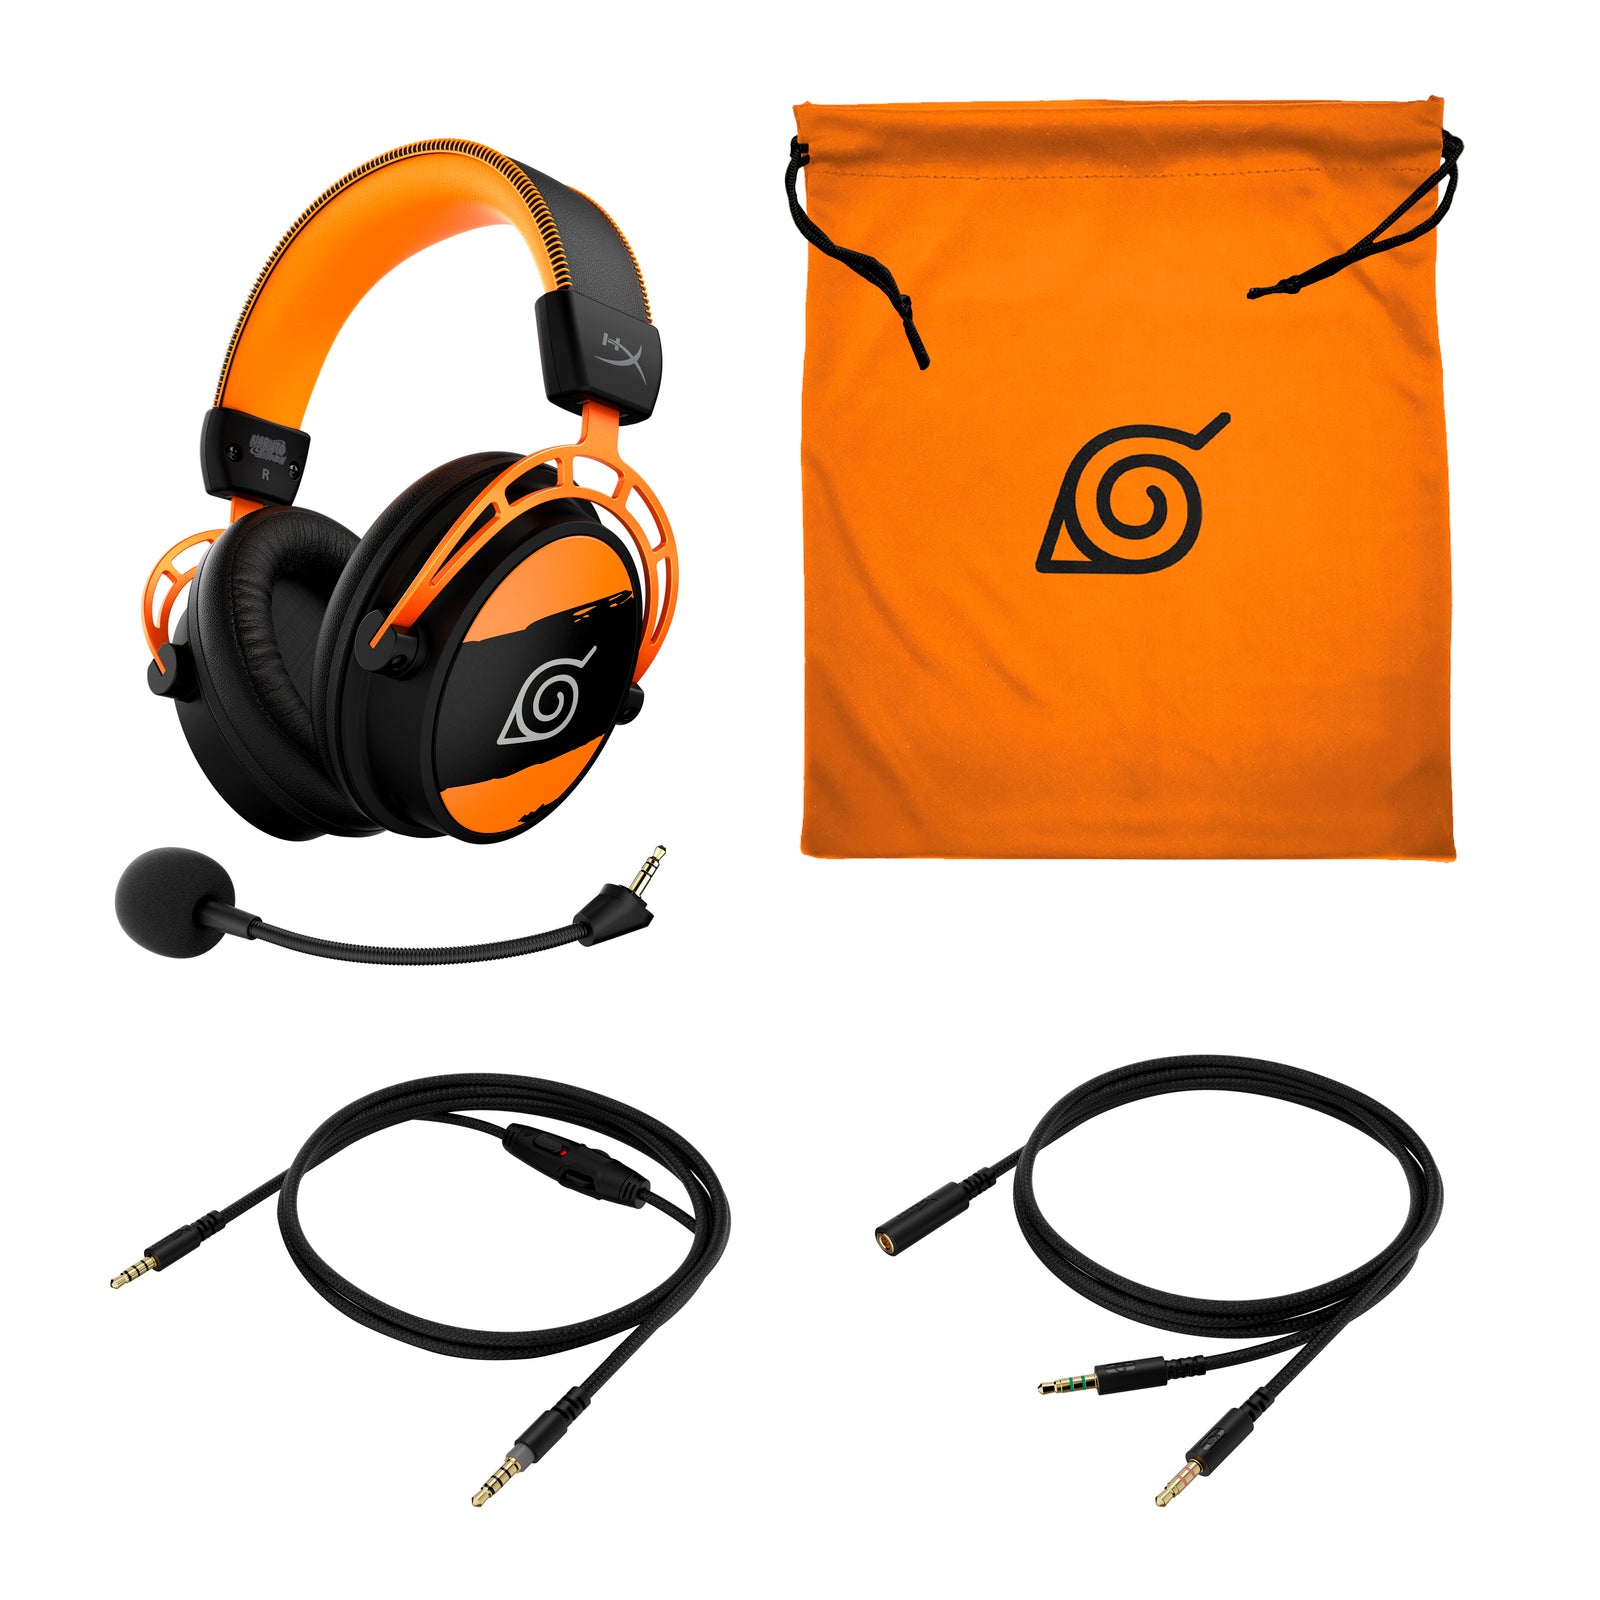 HyperX Cloud Alpha Naruto edition gaming headset with view of mesh bag, detached microphone, in-line audio cable and PC extension cable